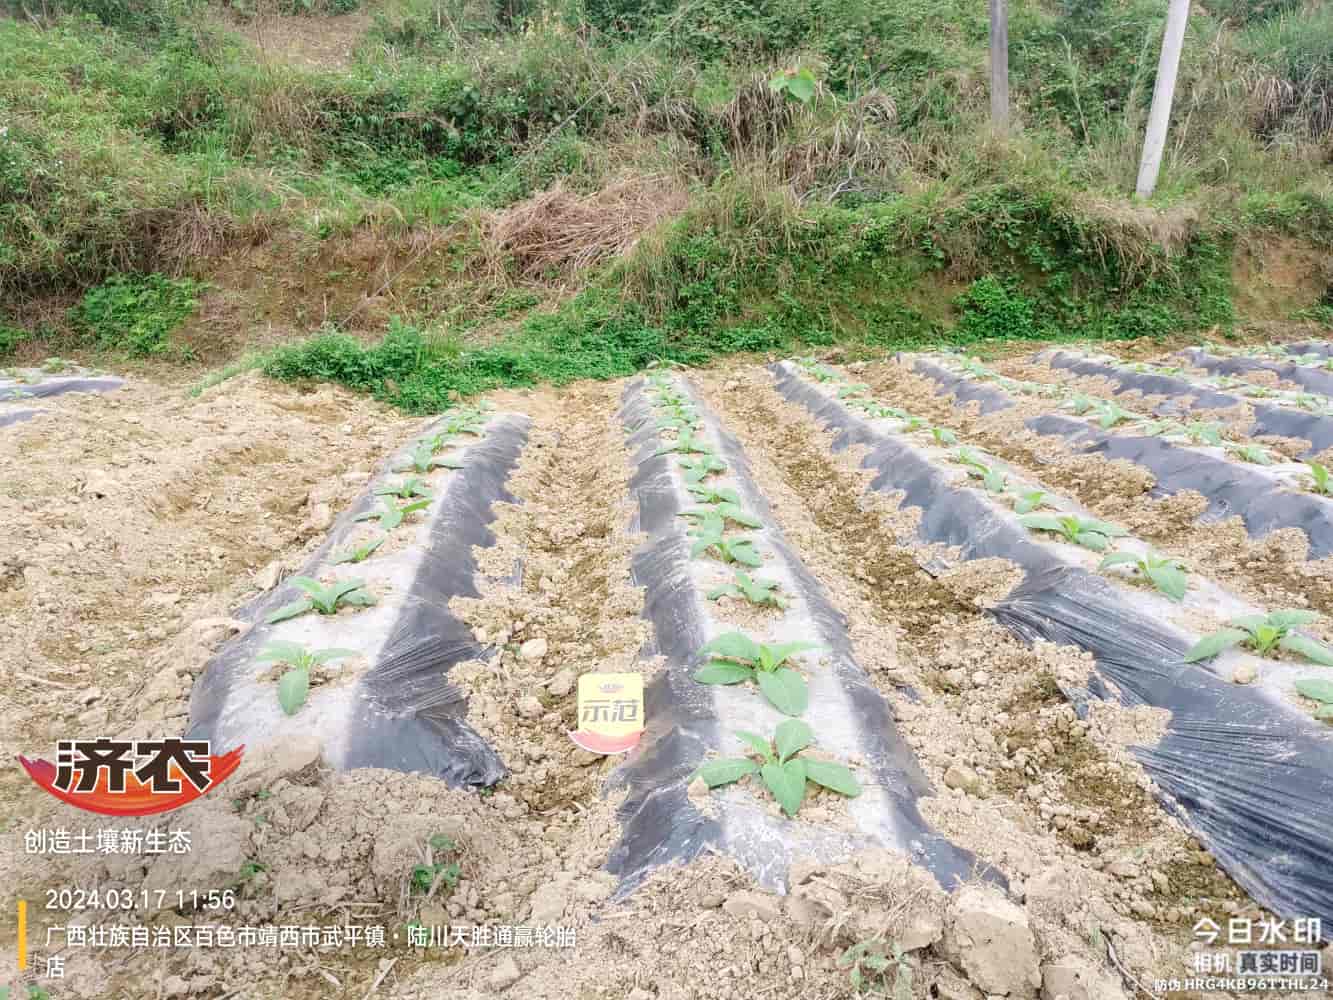 The effect of using agricultural products in Guangxi(图1)